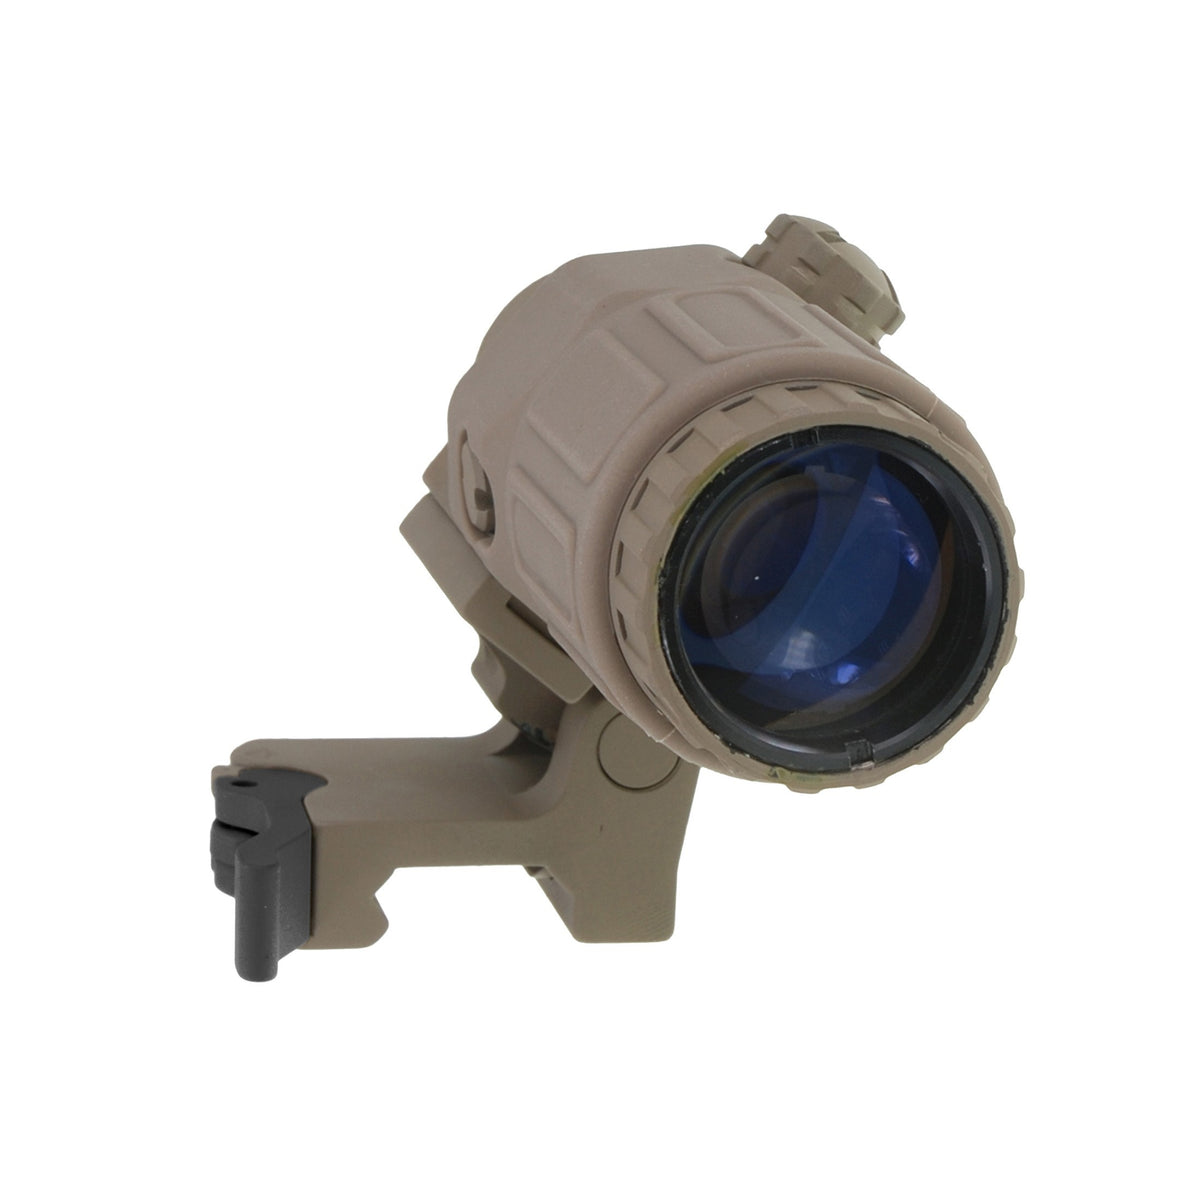 G33 3x Magnifier with Killflash